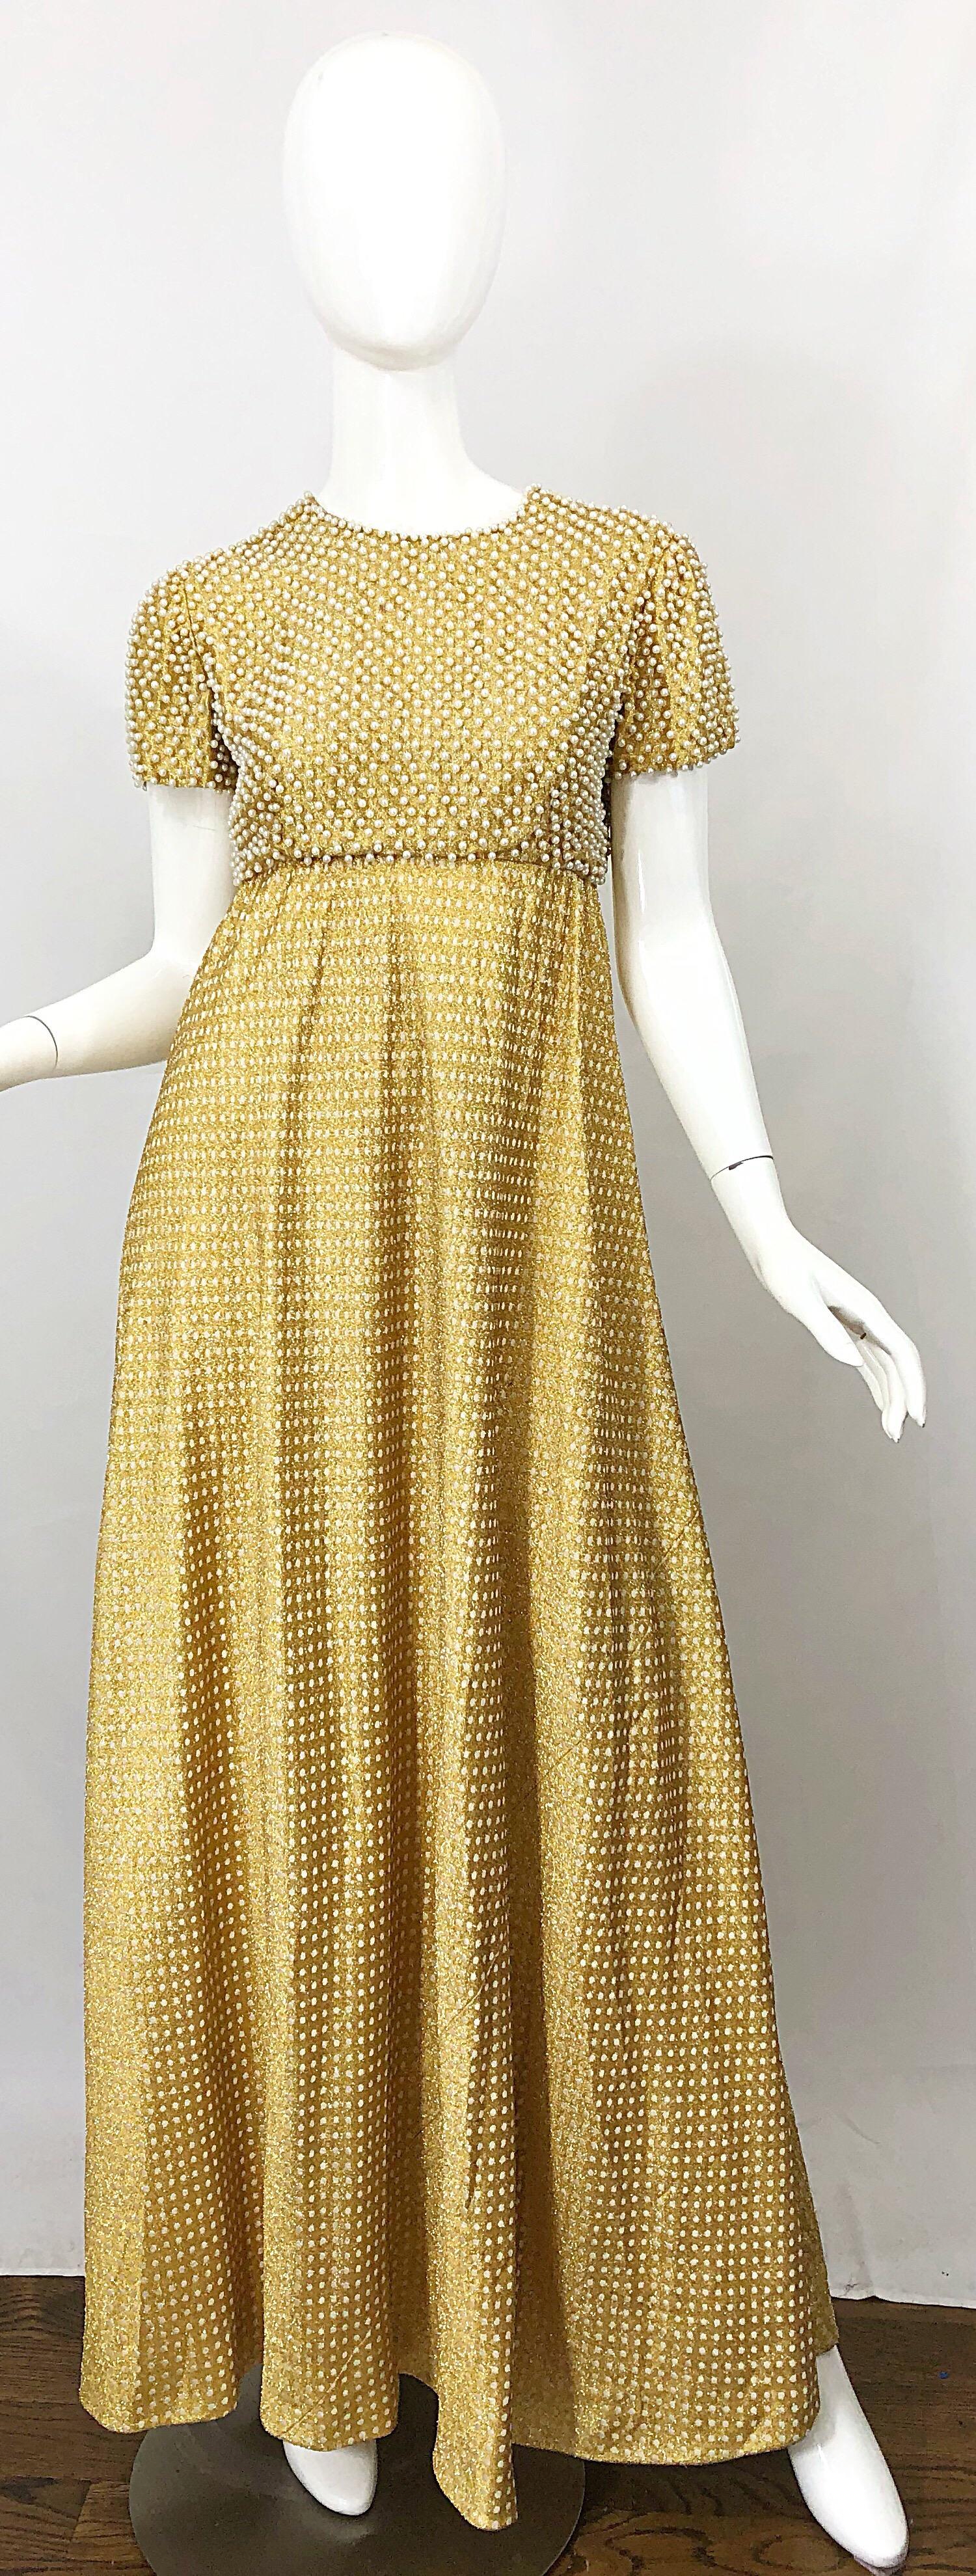 Musuem quality rare 1960s GEOFFREY BEEN gold silk metallic pearl encrusted short sleeve gown! Features hundreds of hand-sewn ivory pearls throughout the entire bodice. Gold silk lurex features white polka dots throughout. Hidden metal zipper up the